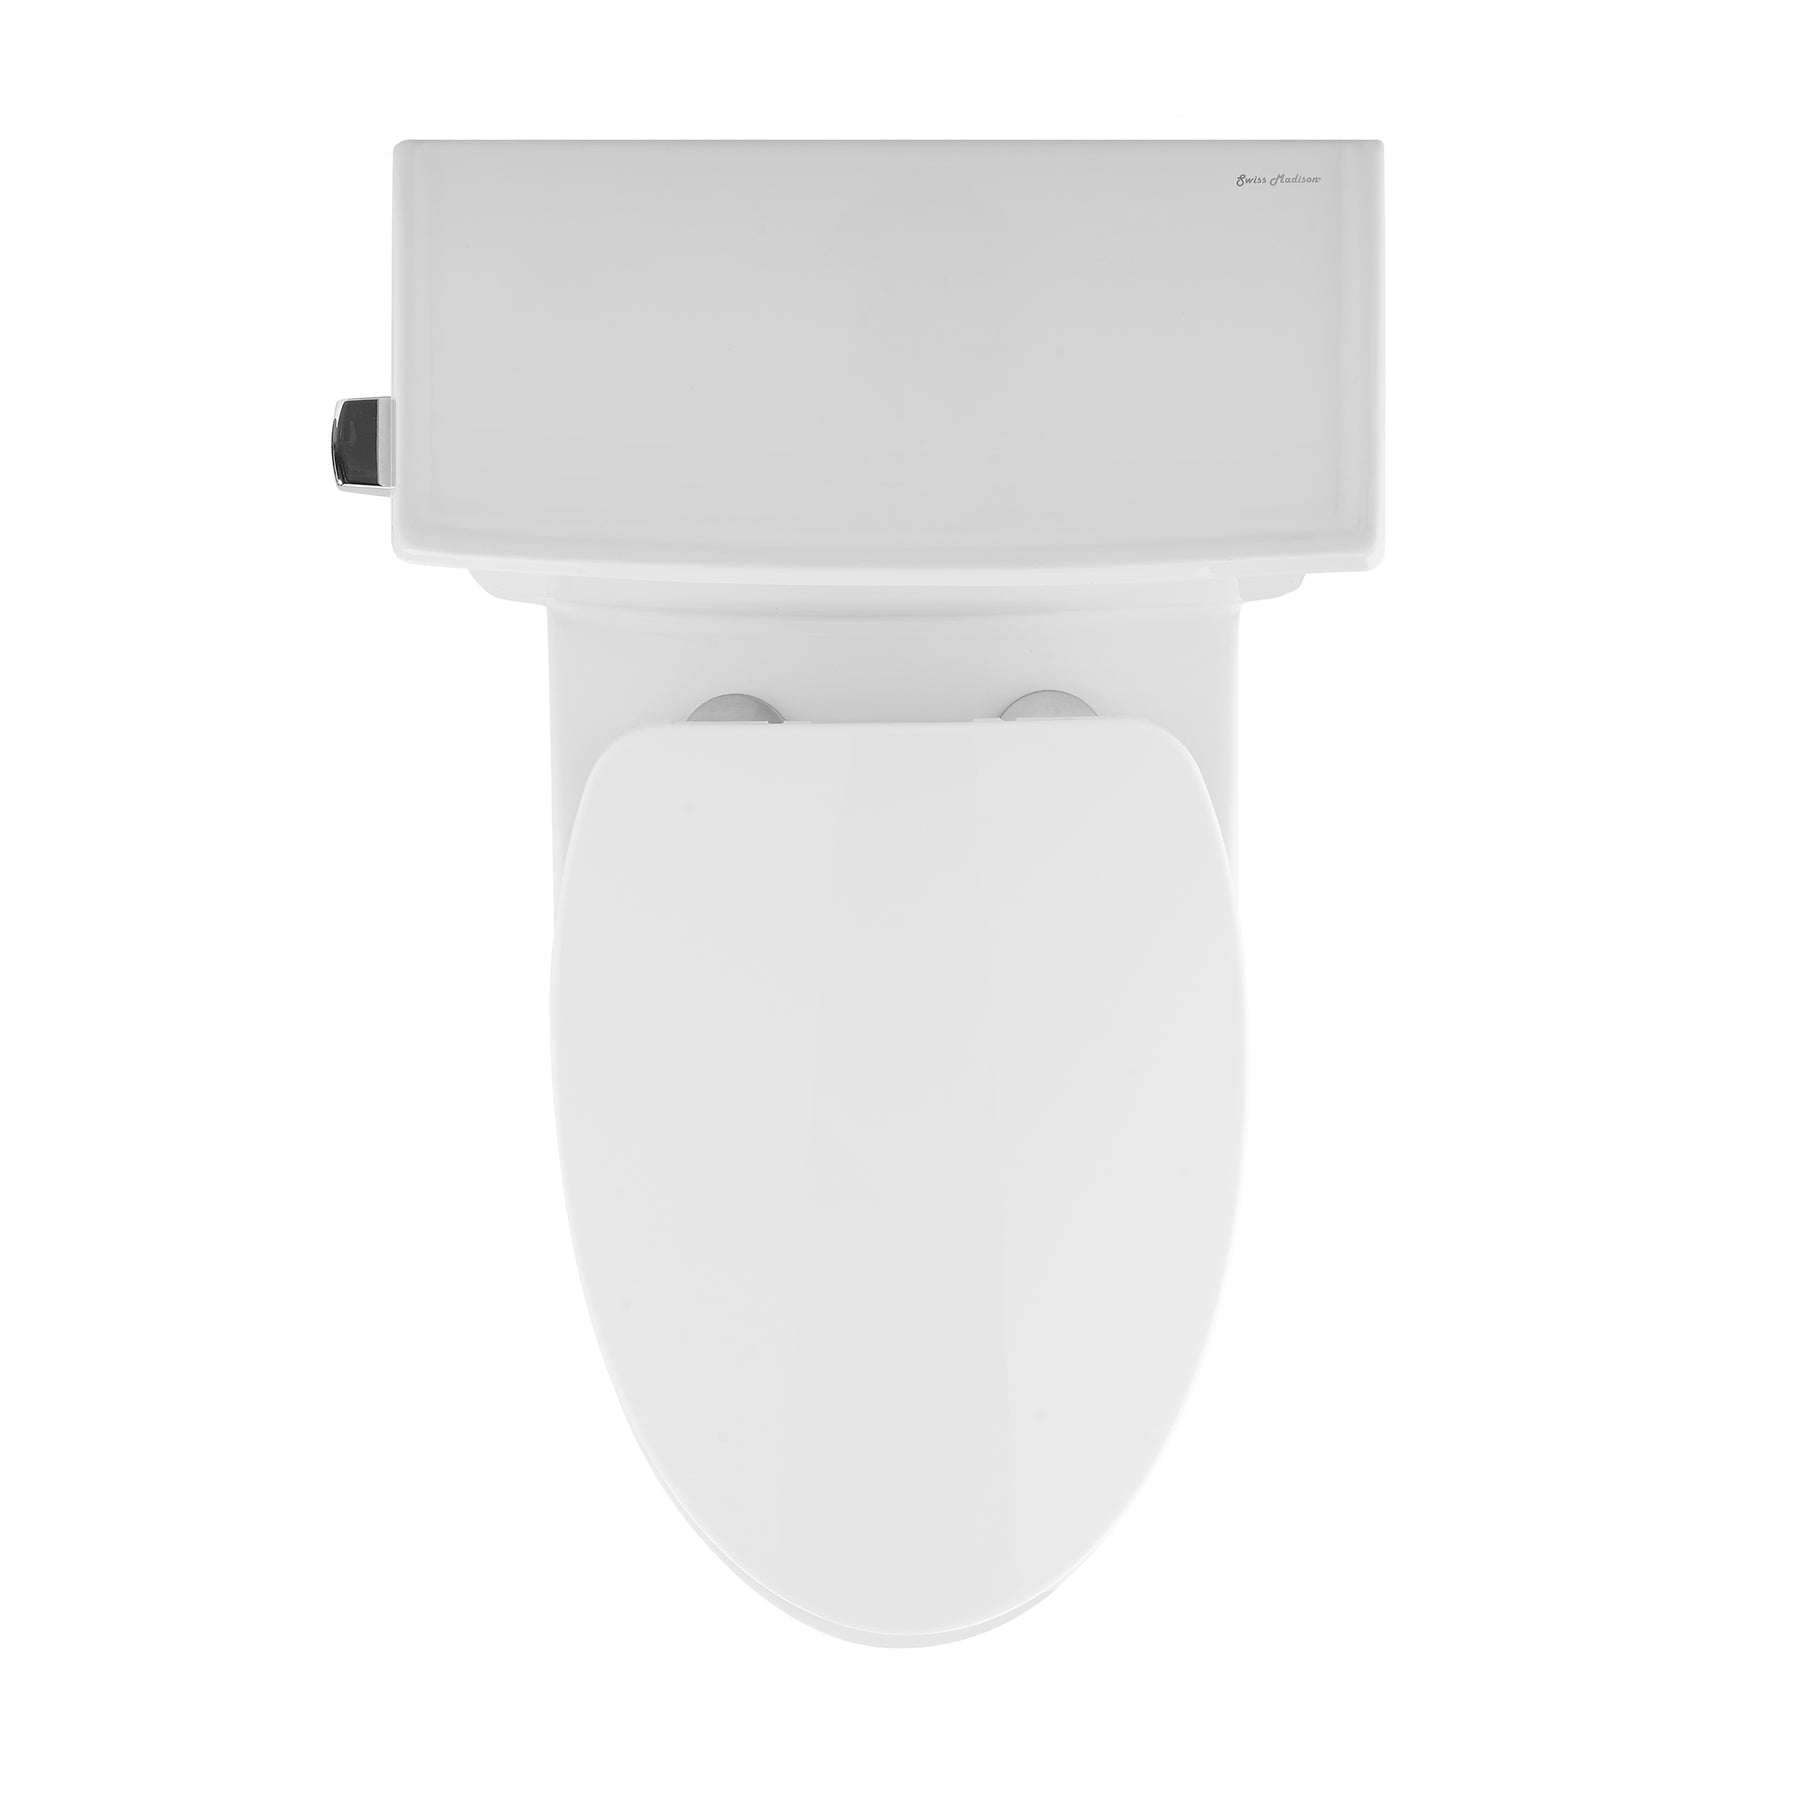 Swiss Madison Voltaire One-Piece Elongated Toilet Side Flush 1.28 gpf - SM-1T114